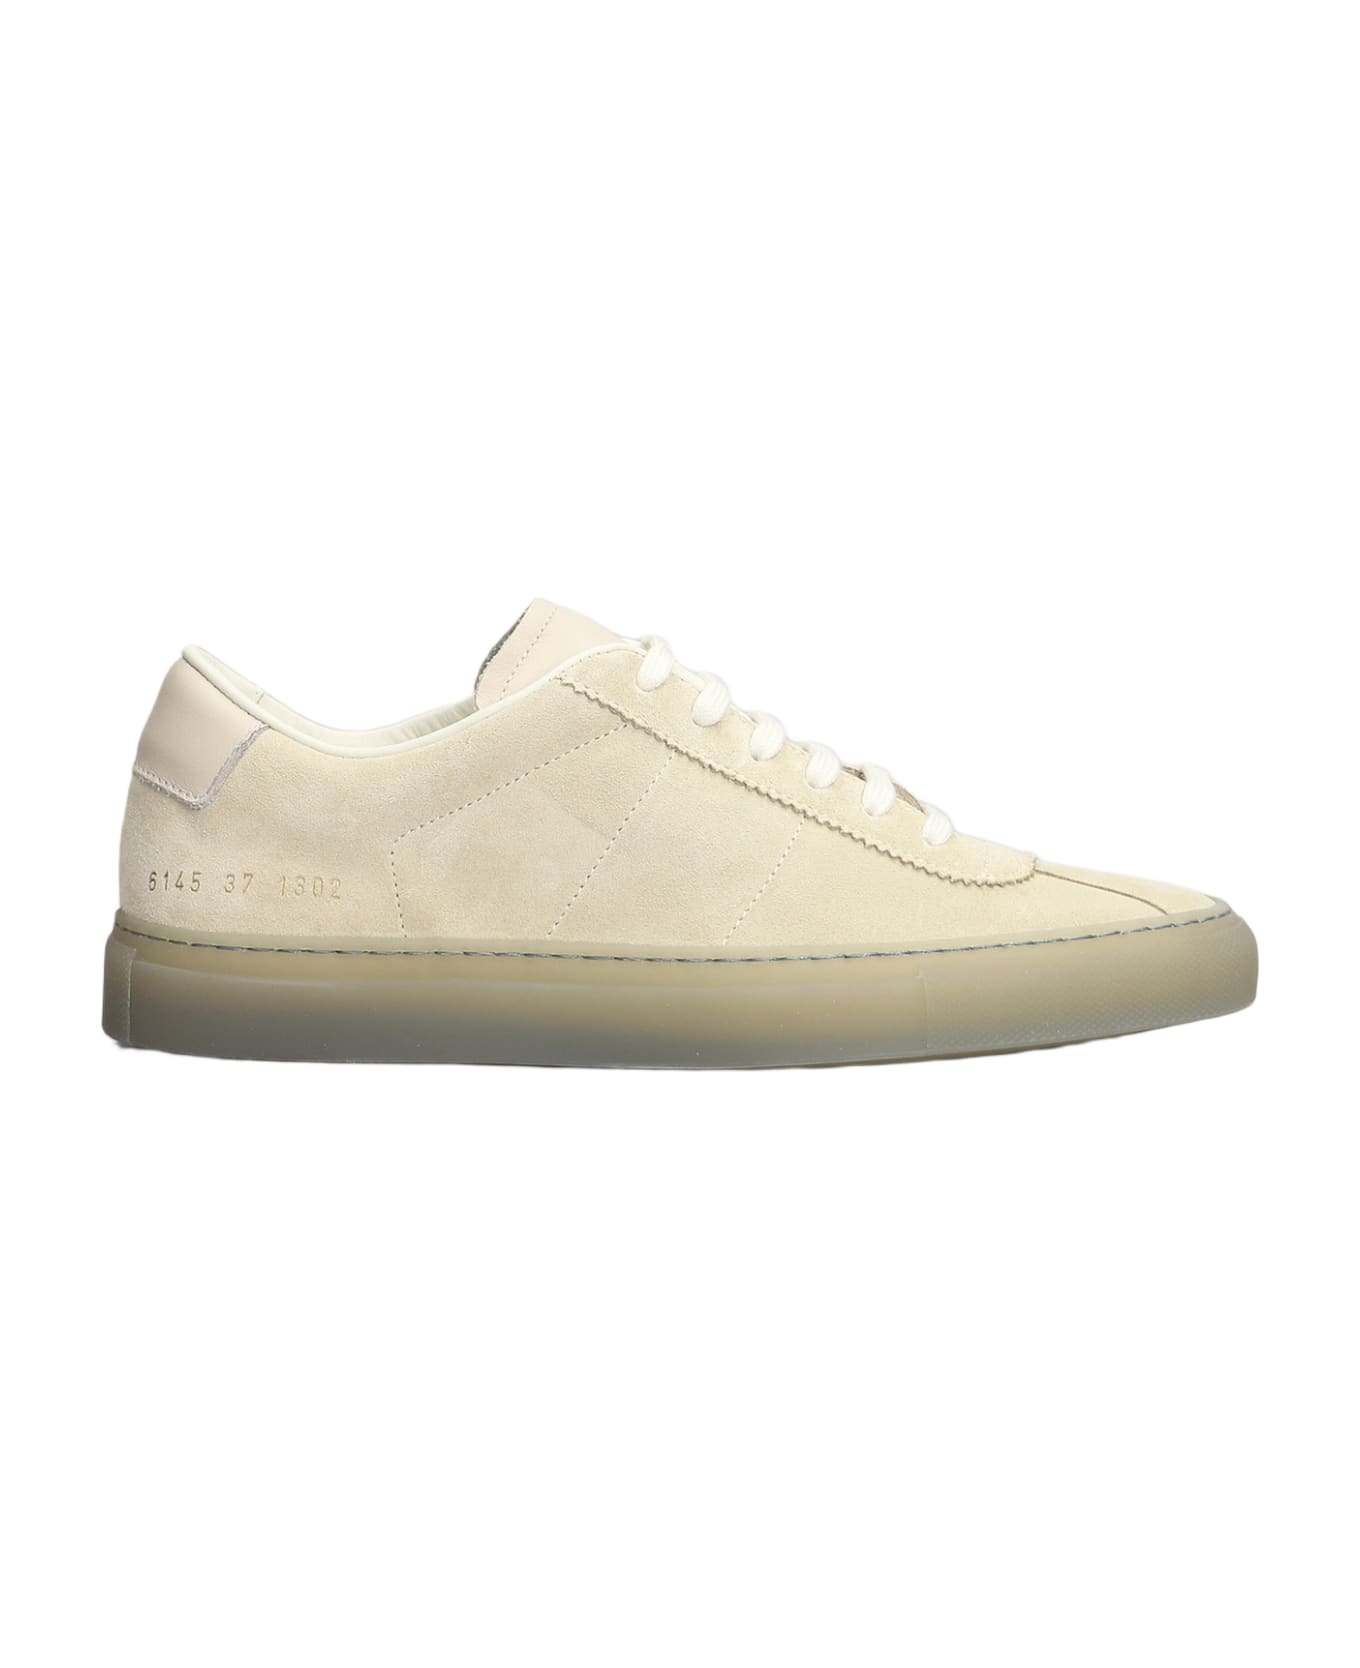 Common Projects Tennis 70 Sneakers - beige スニーカー